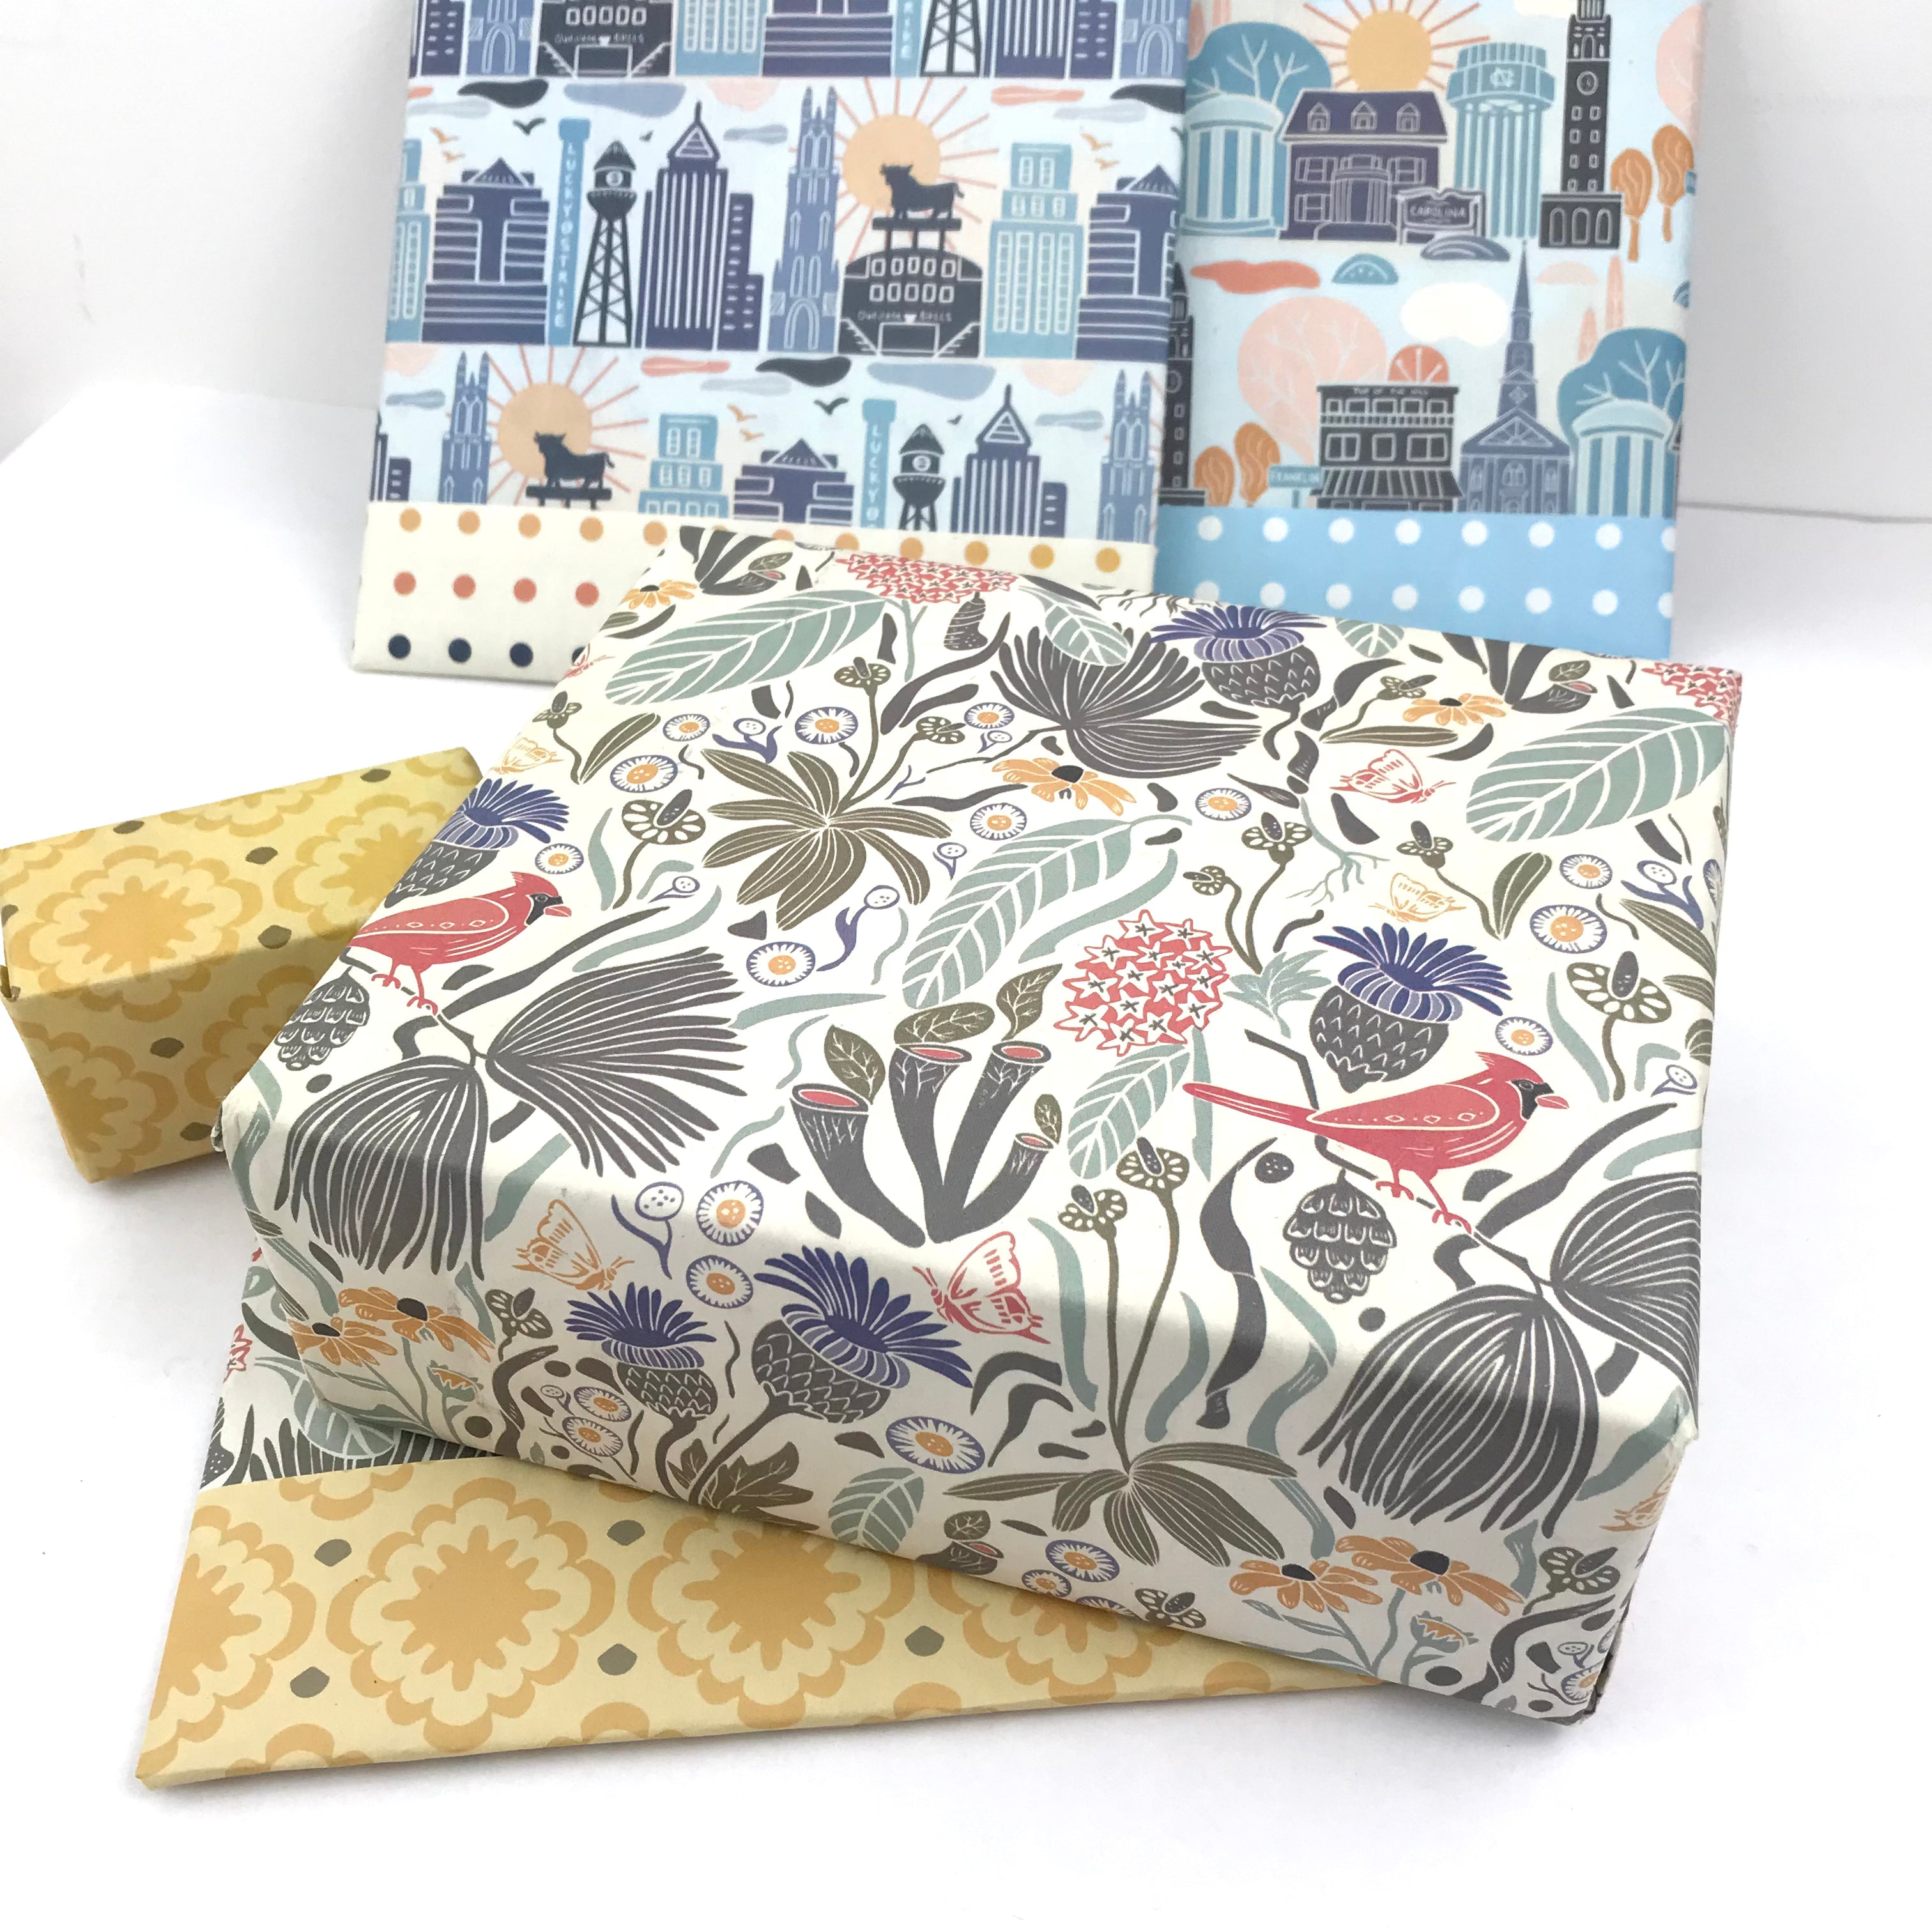 Bull Durham Gift Wrapping Paper – The Raw Edition Candle Company, LLC